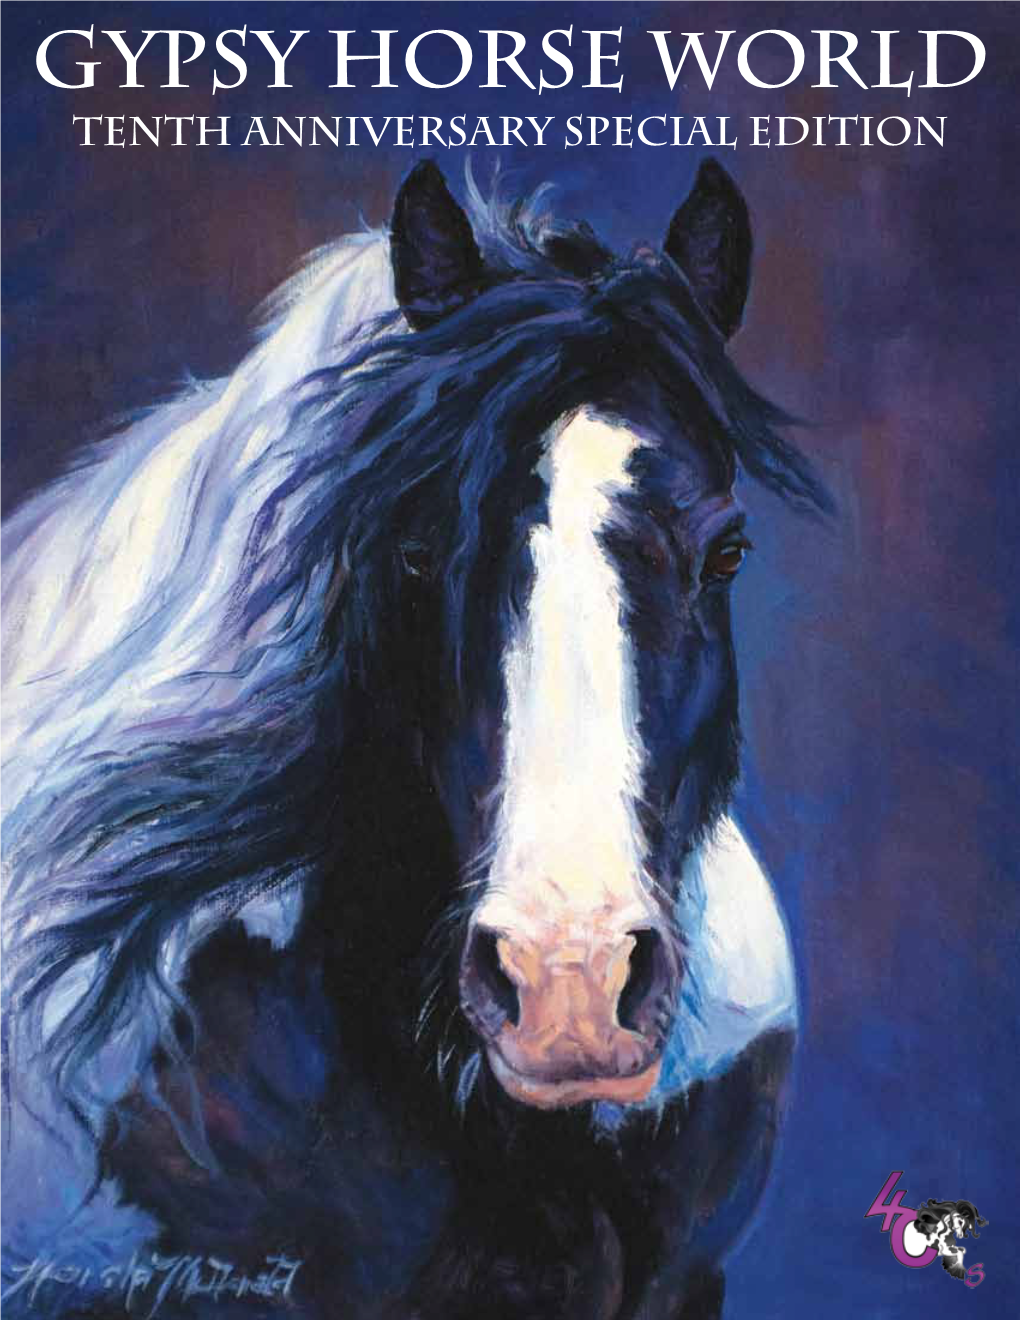 Gypsy Horse World Tenth Anniversary Special Edition